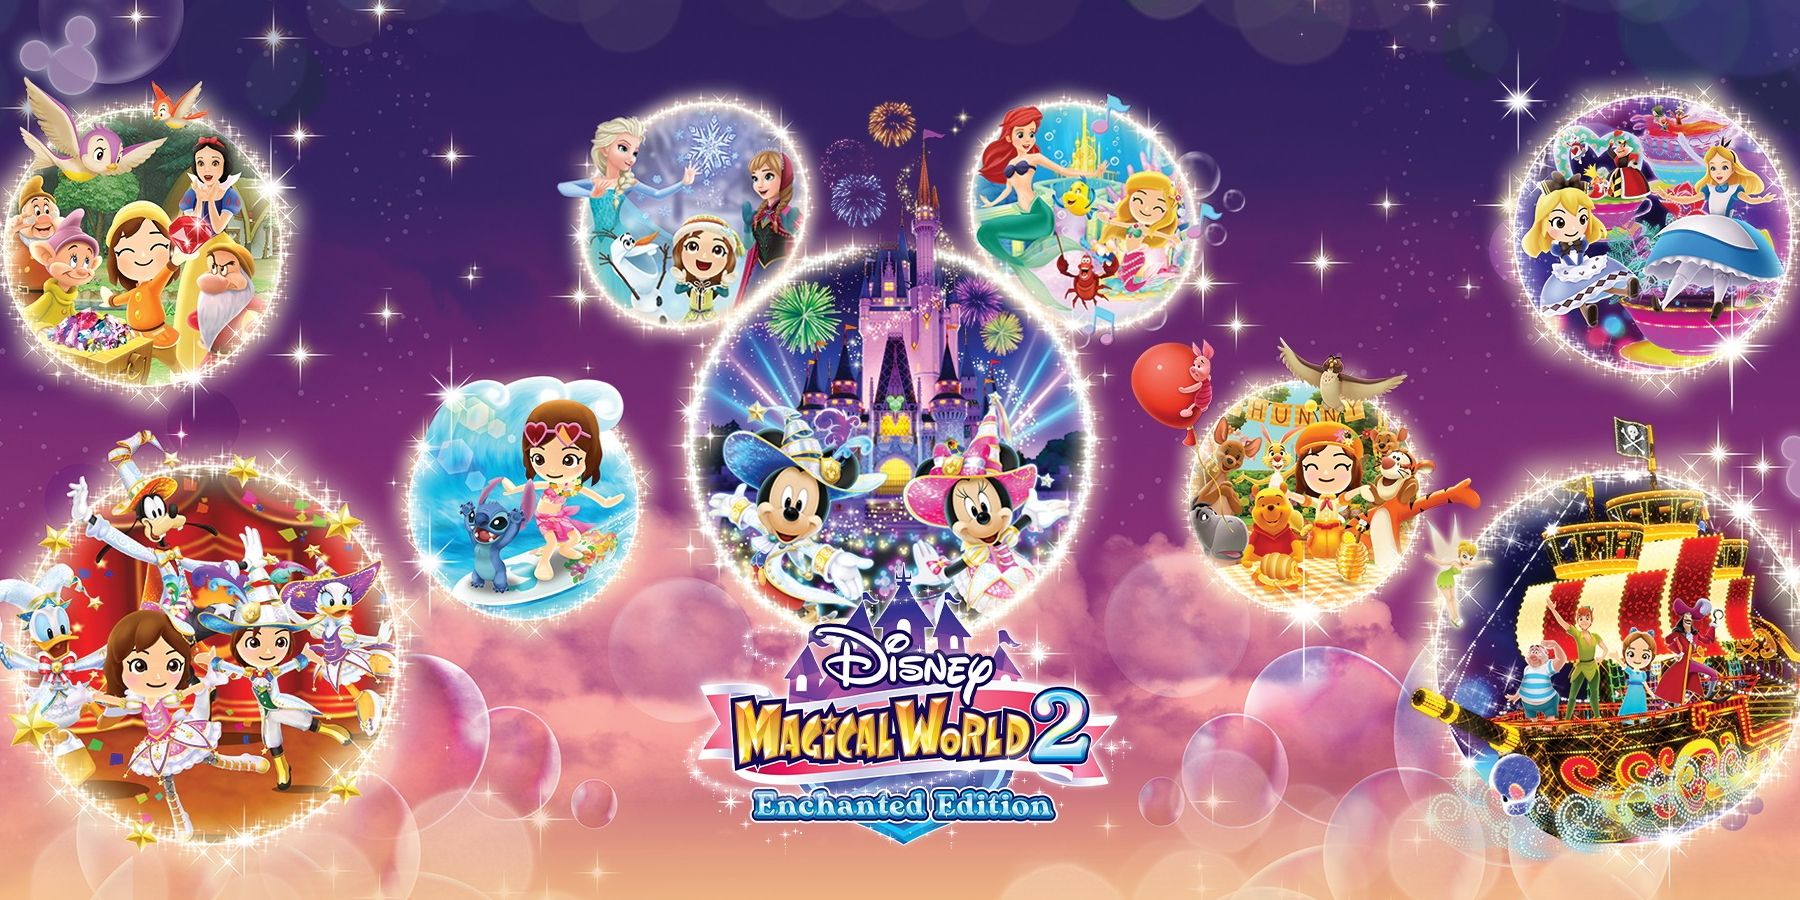 Disney Magical World 2: Enchanted Edition Compt do Switch tento rok